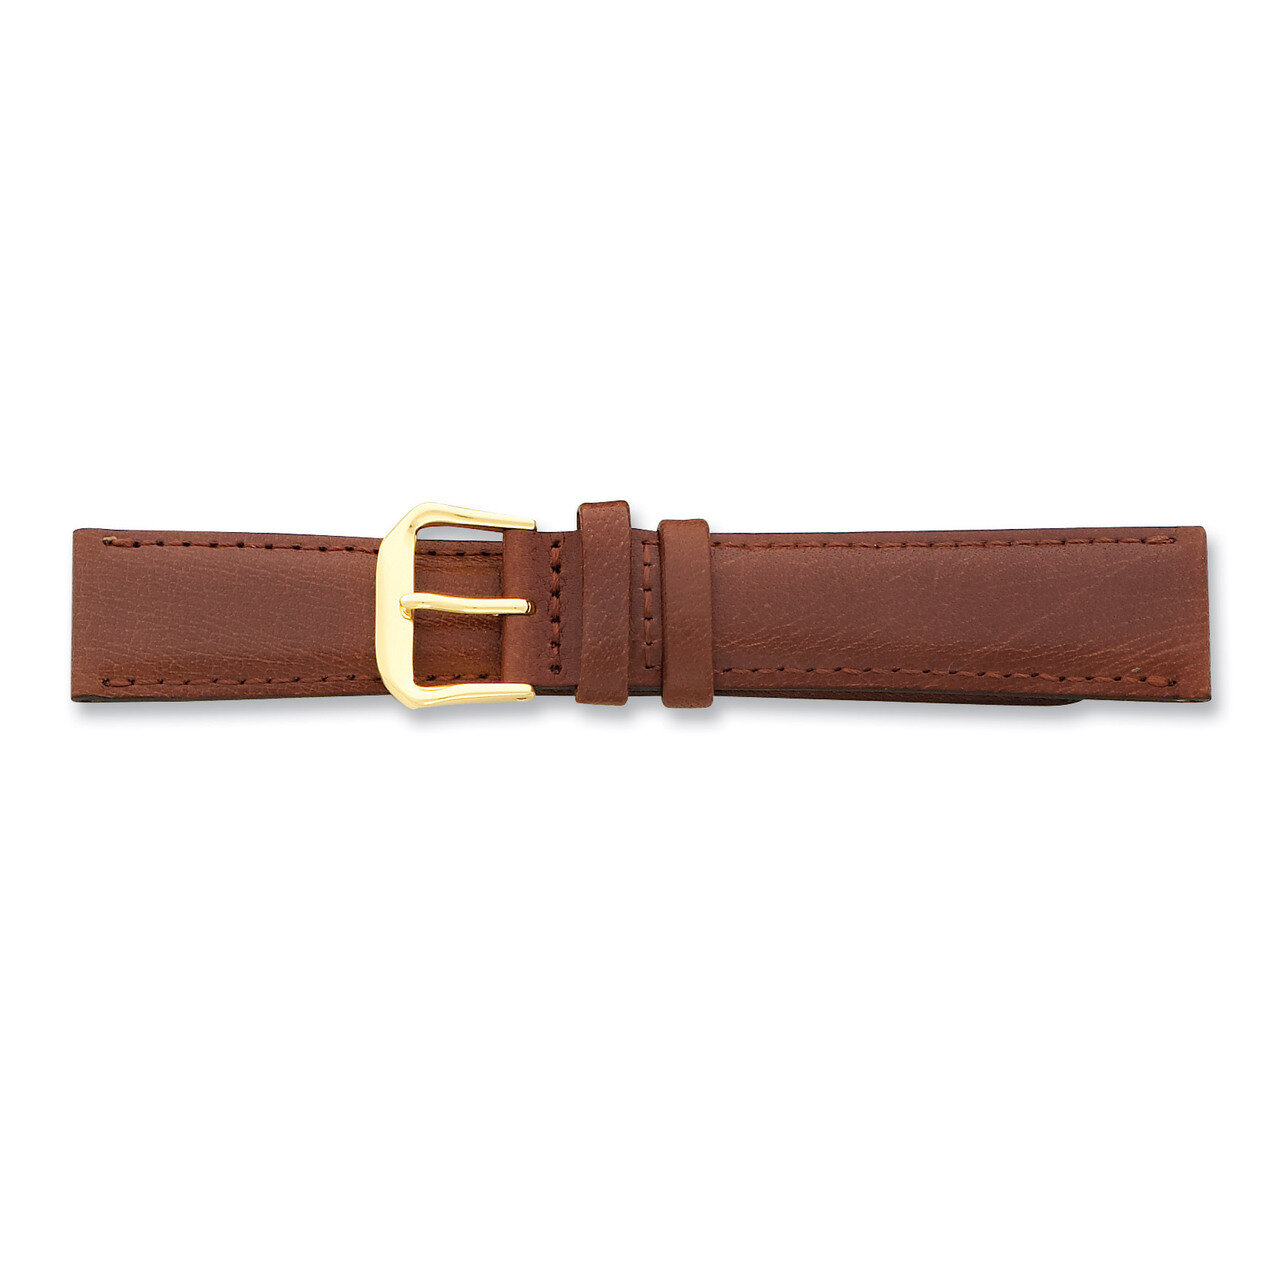 14mm Havana Smooth Leather Gold-tone Buckle Watch Band BA117-14